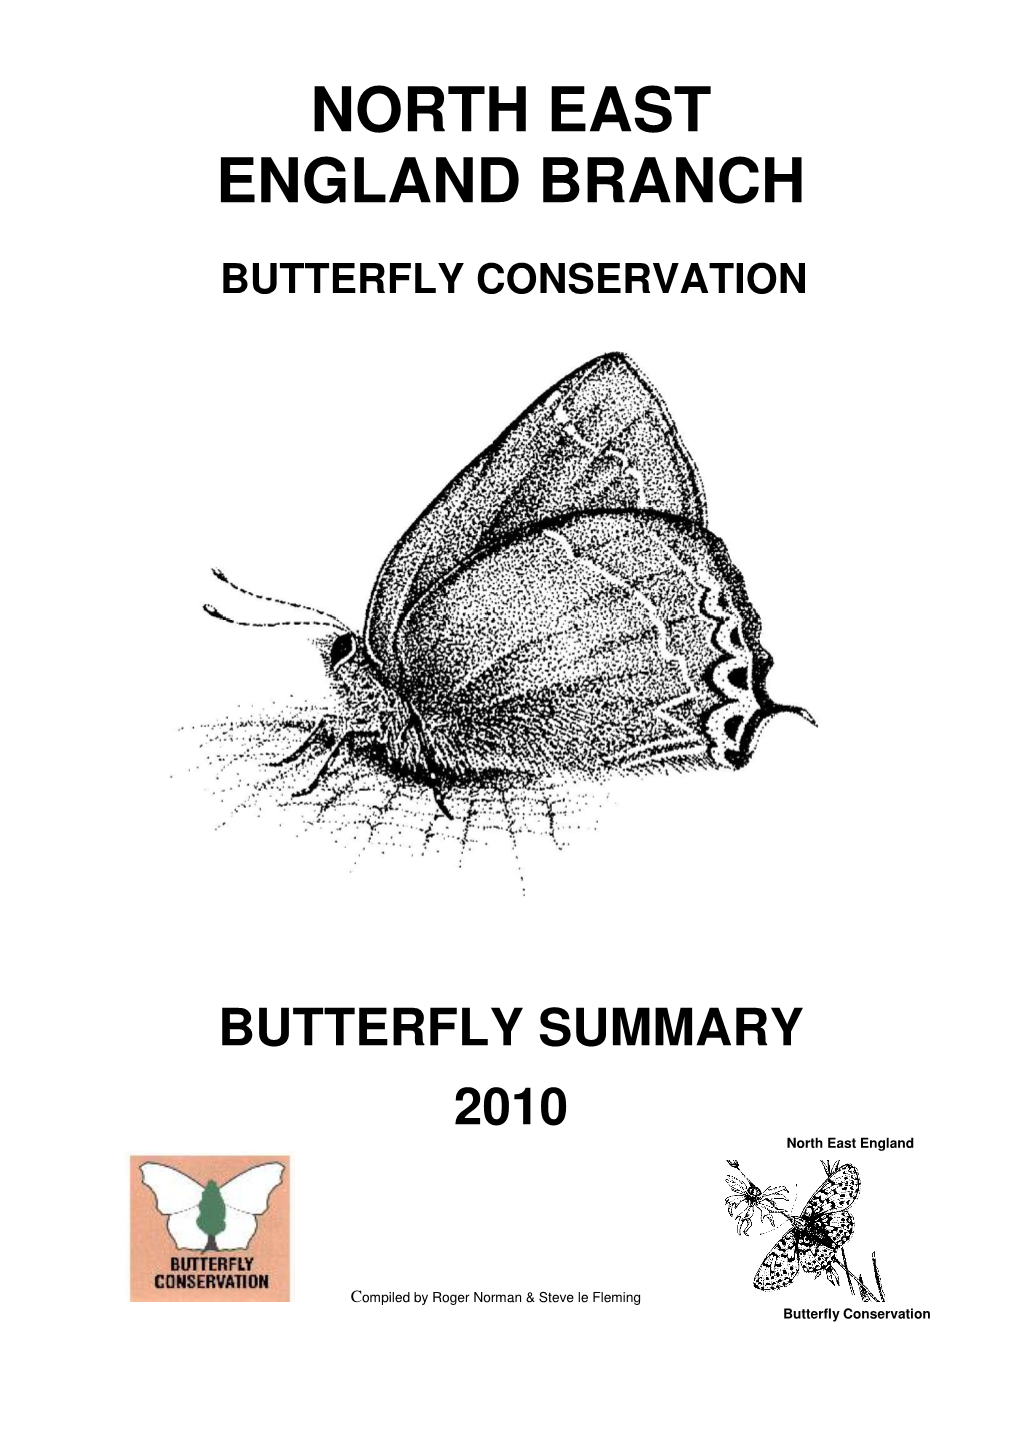 2010 Butterfly Summary Report